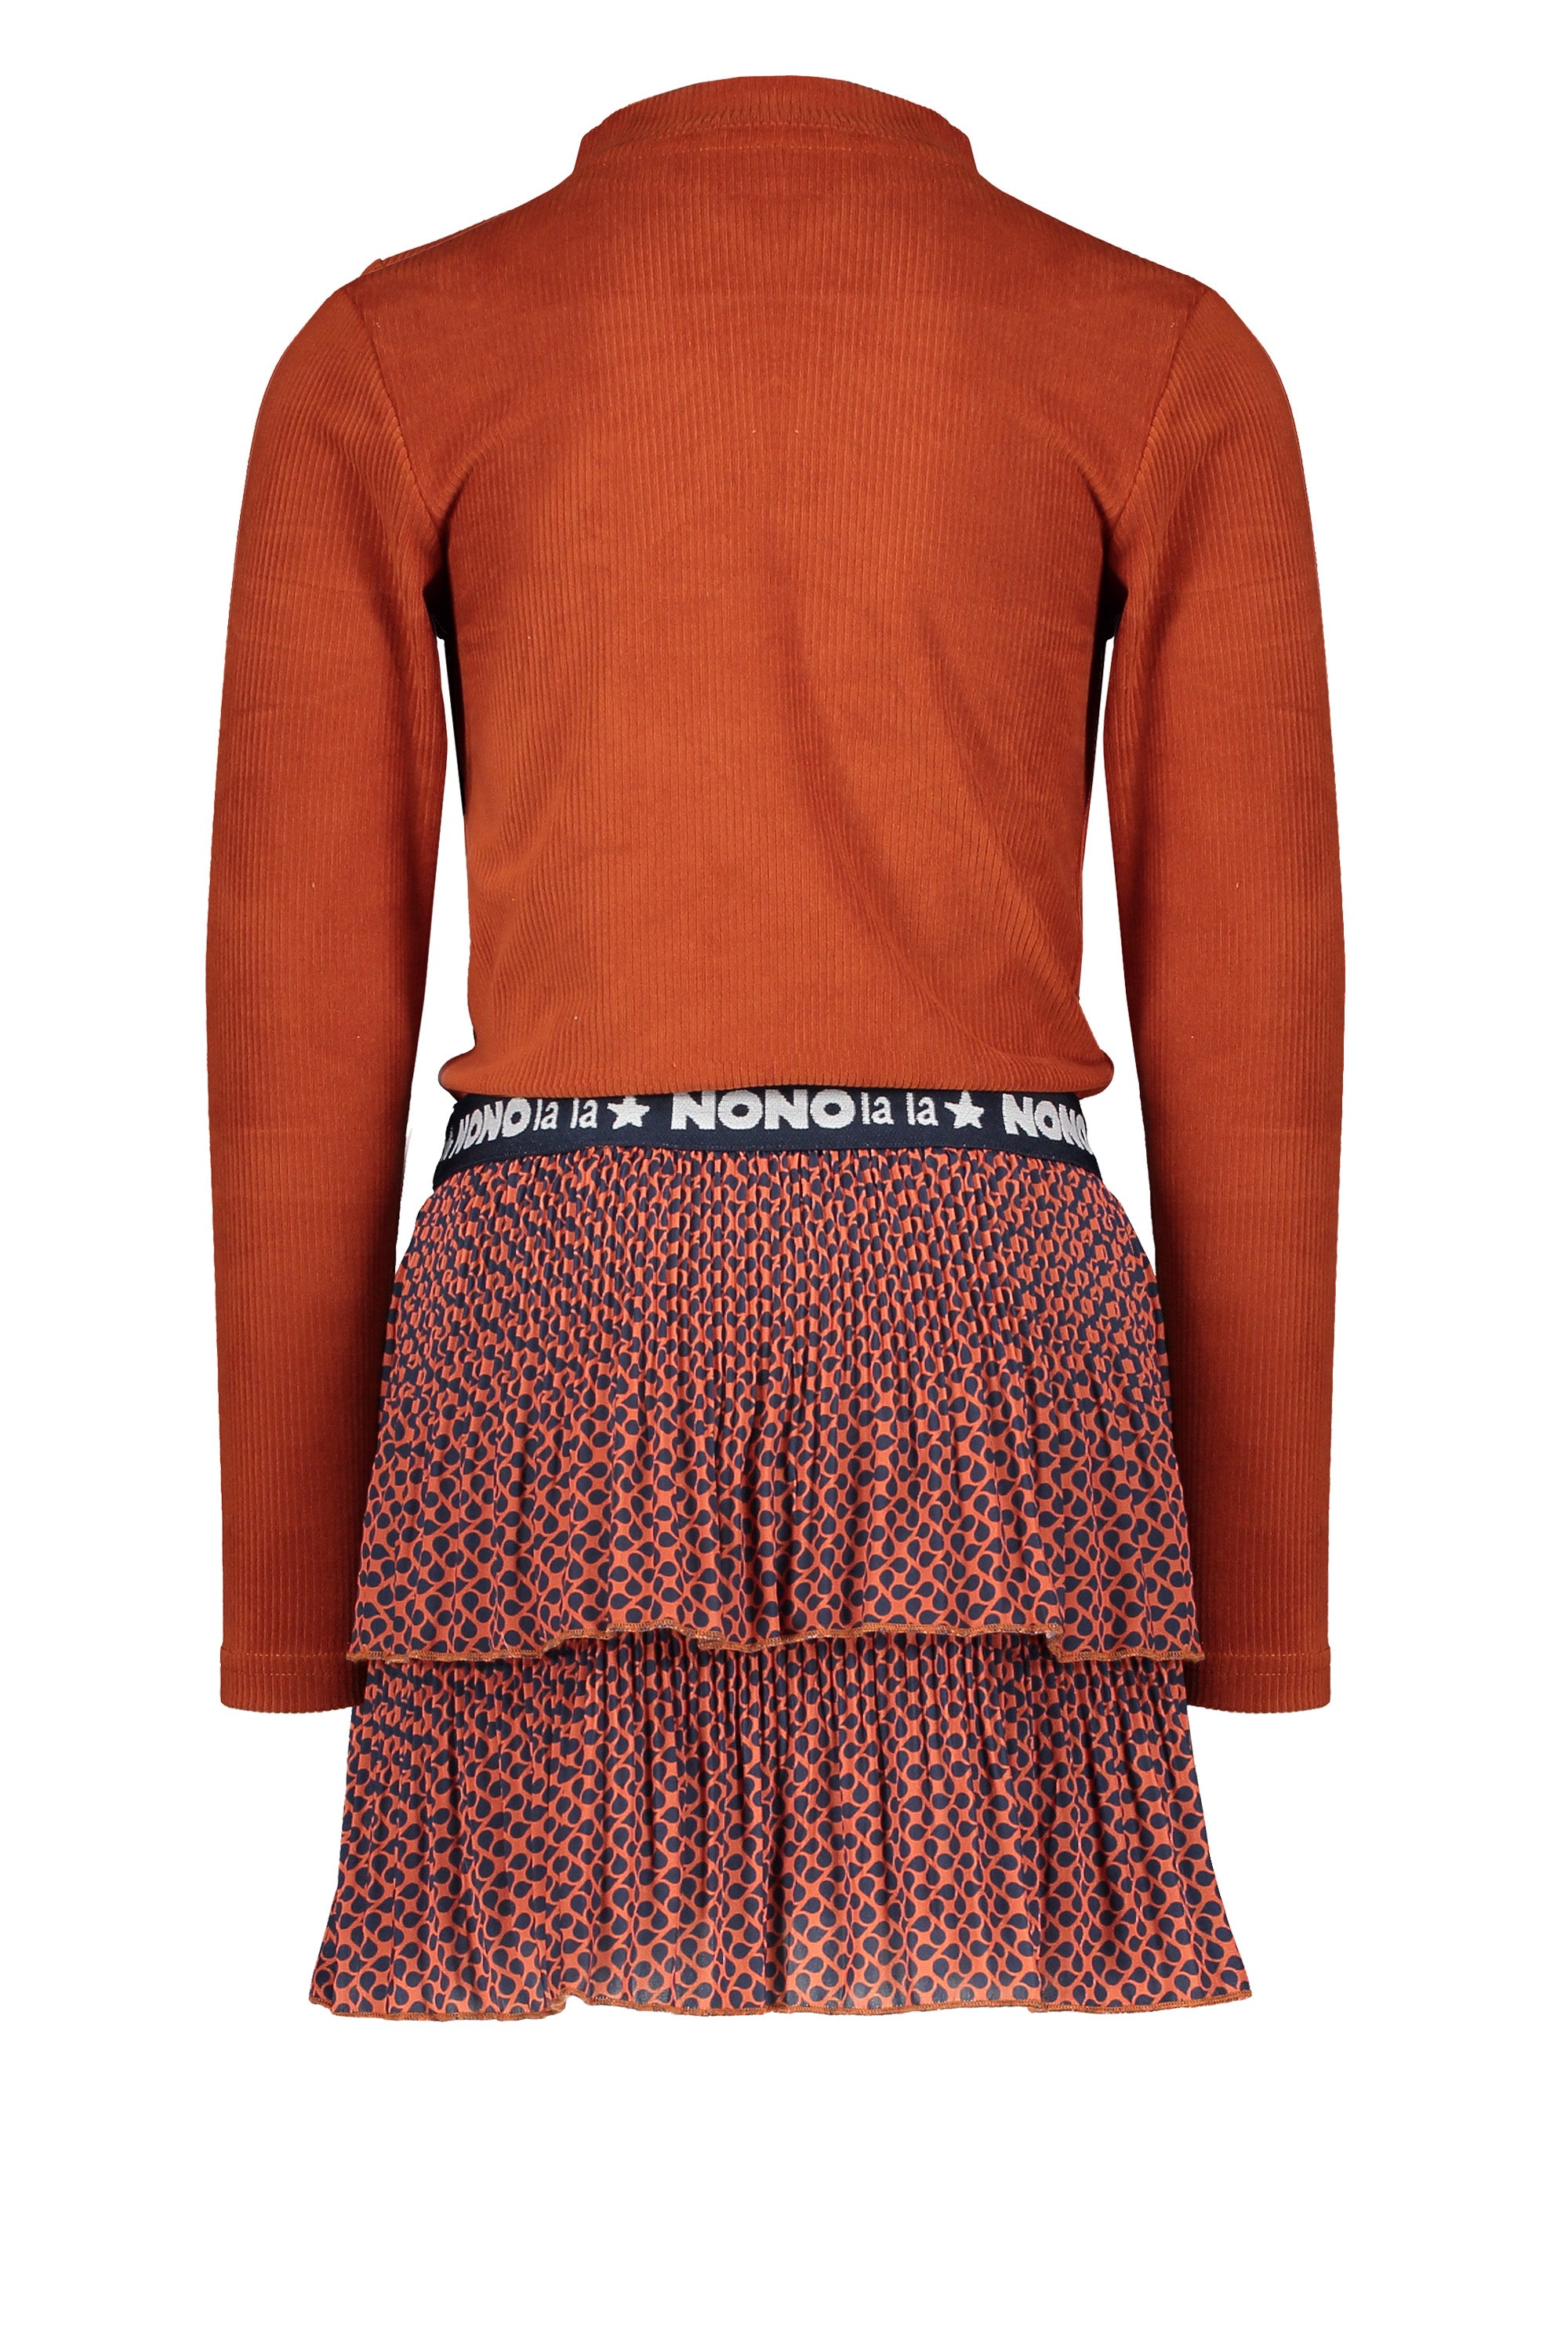 NoNo Mika combi dress with velours ribbed top+woven layered skirt